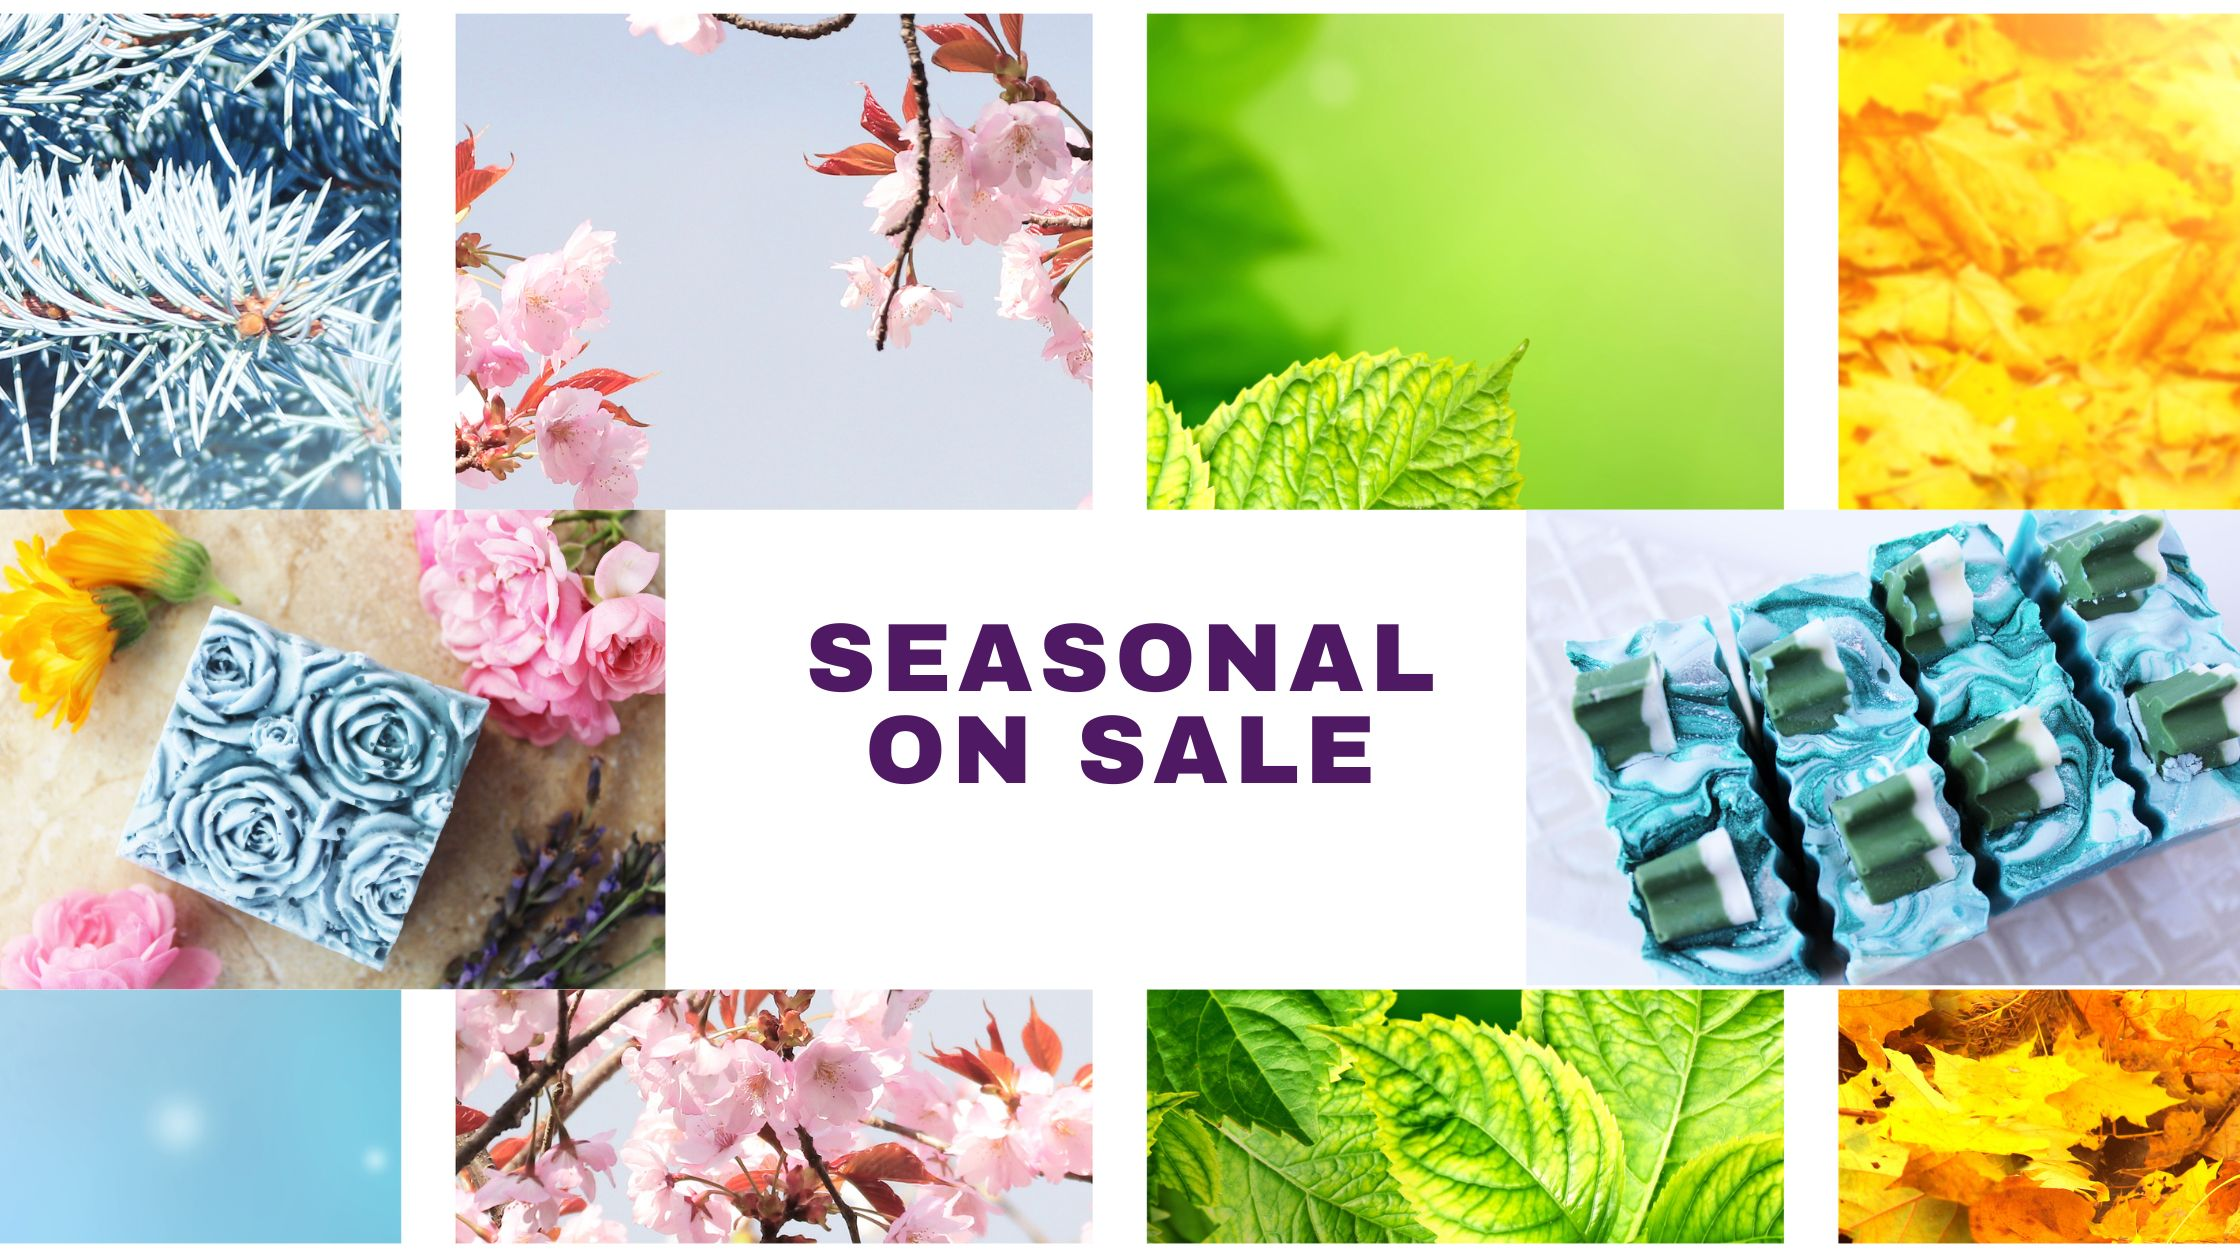 Season on sale Specials by Vermont Lavender